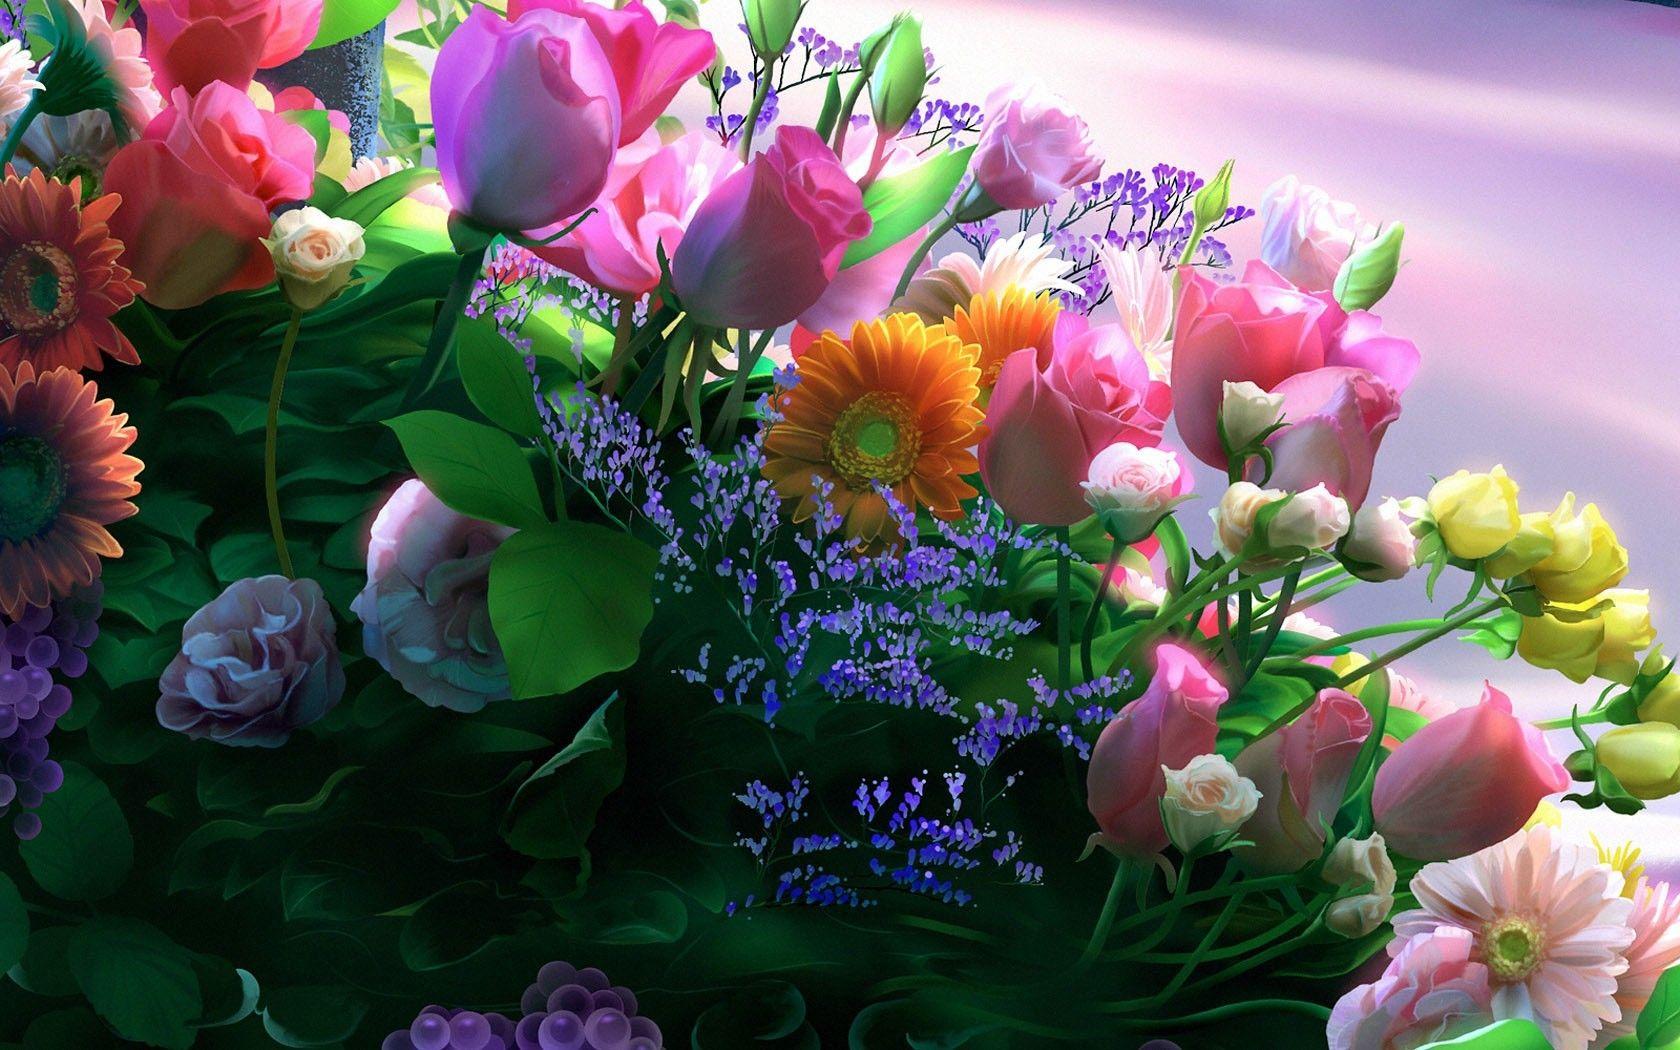 Flower wallpaper: SWEET GIFT Marbles Bouquets Blooms Pink